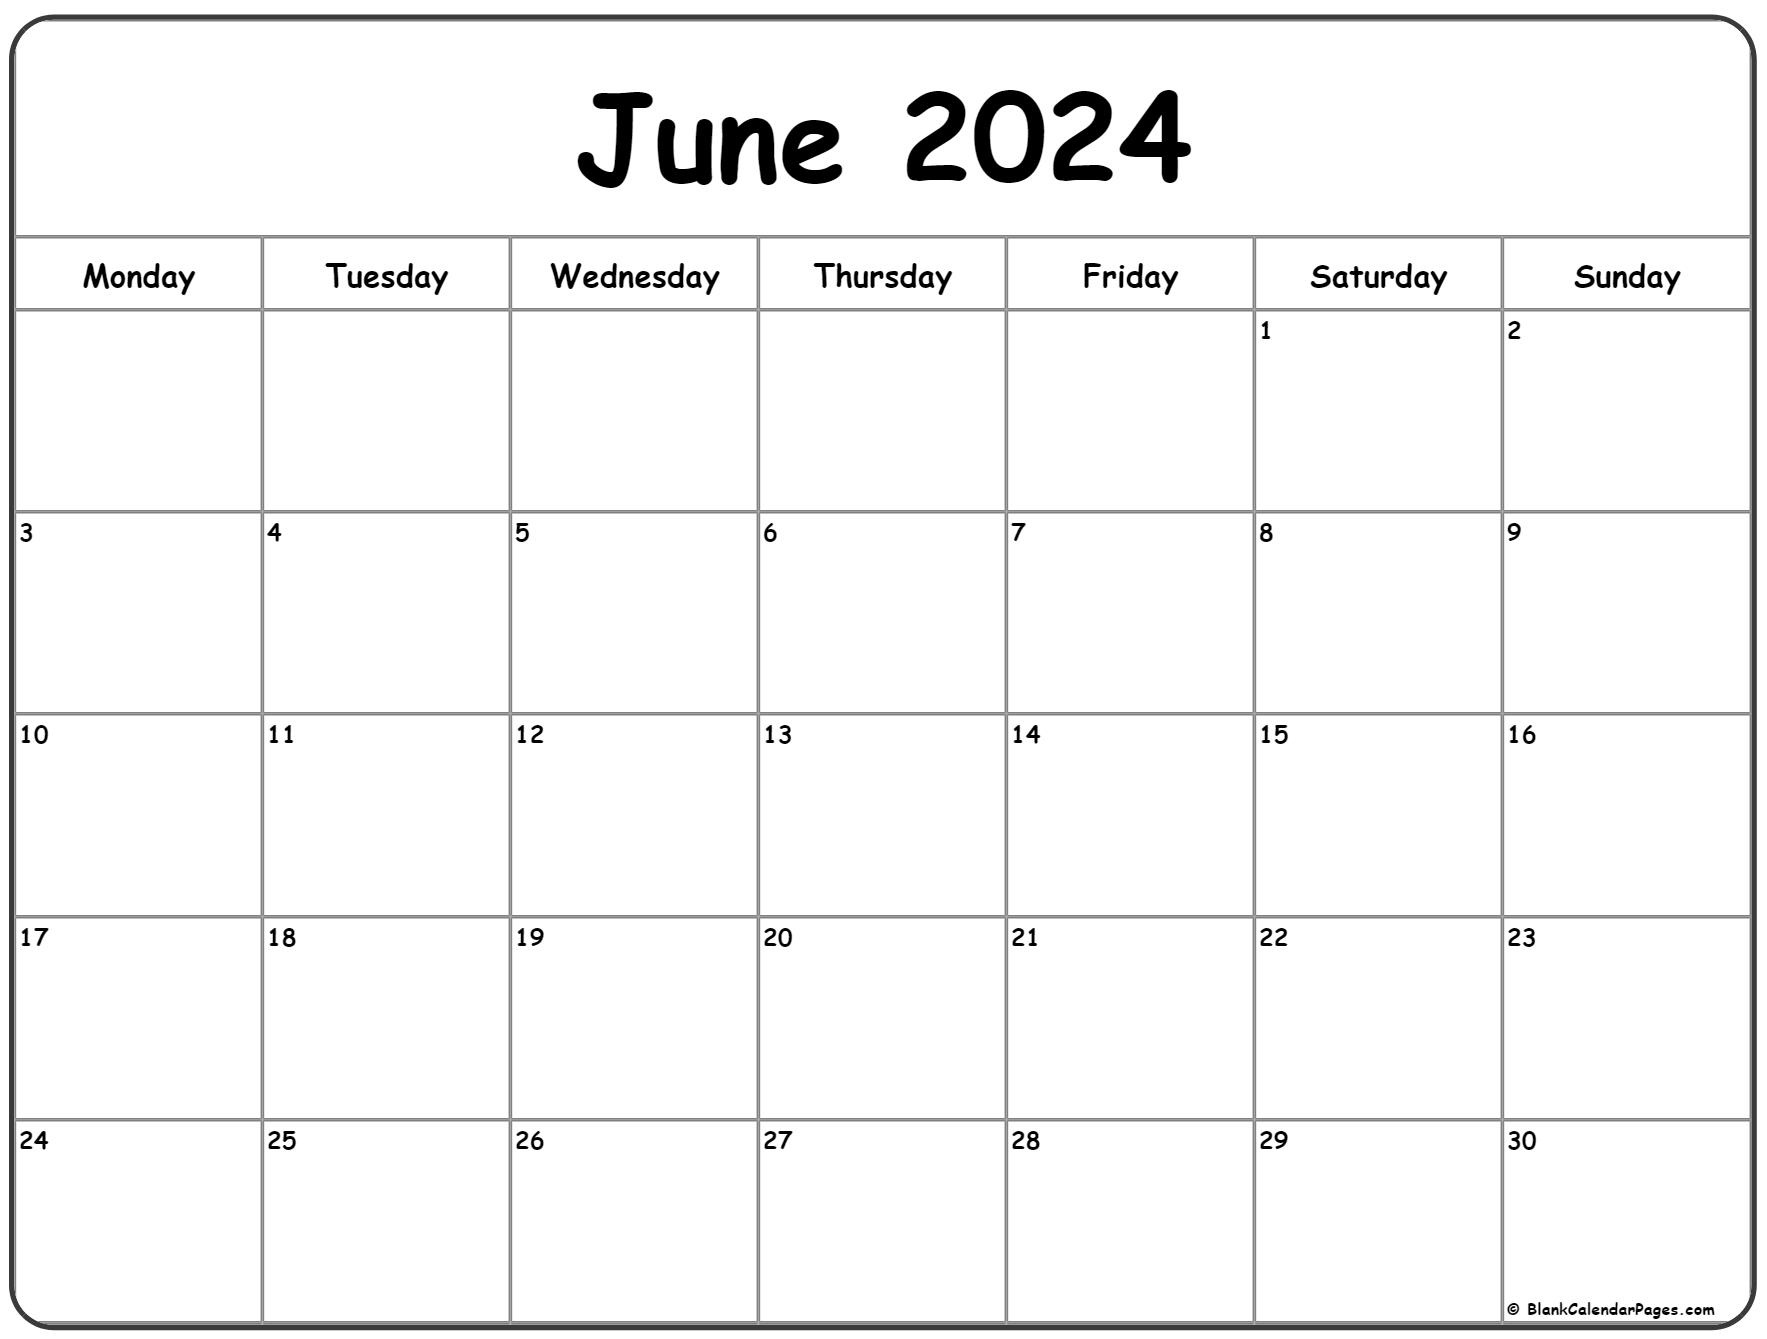 June 2024 Monday Calendar | Monday To Sunday with Calender June 2024